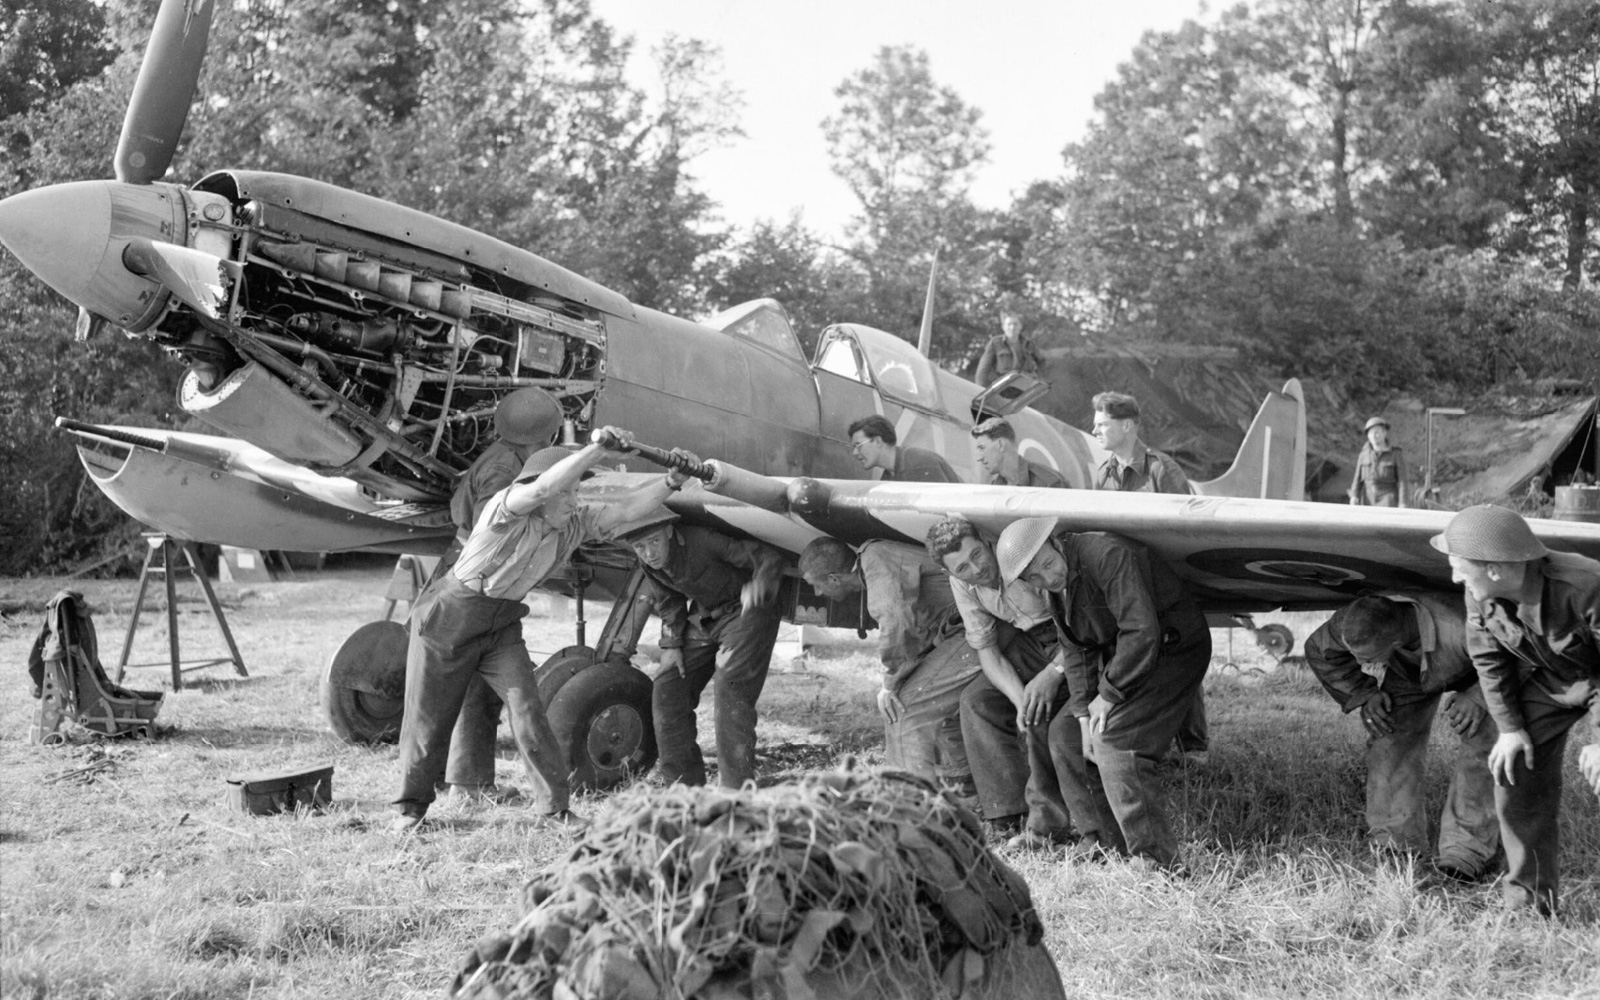 Men of an RAF Repair and Salvage Unit working on a damaged Supermarine Spitfire Mk IX of No 403 Squadron, Royal Canadian Air Force, at a forward airstrip in Normandy, 19 June 1944